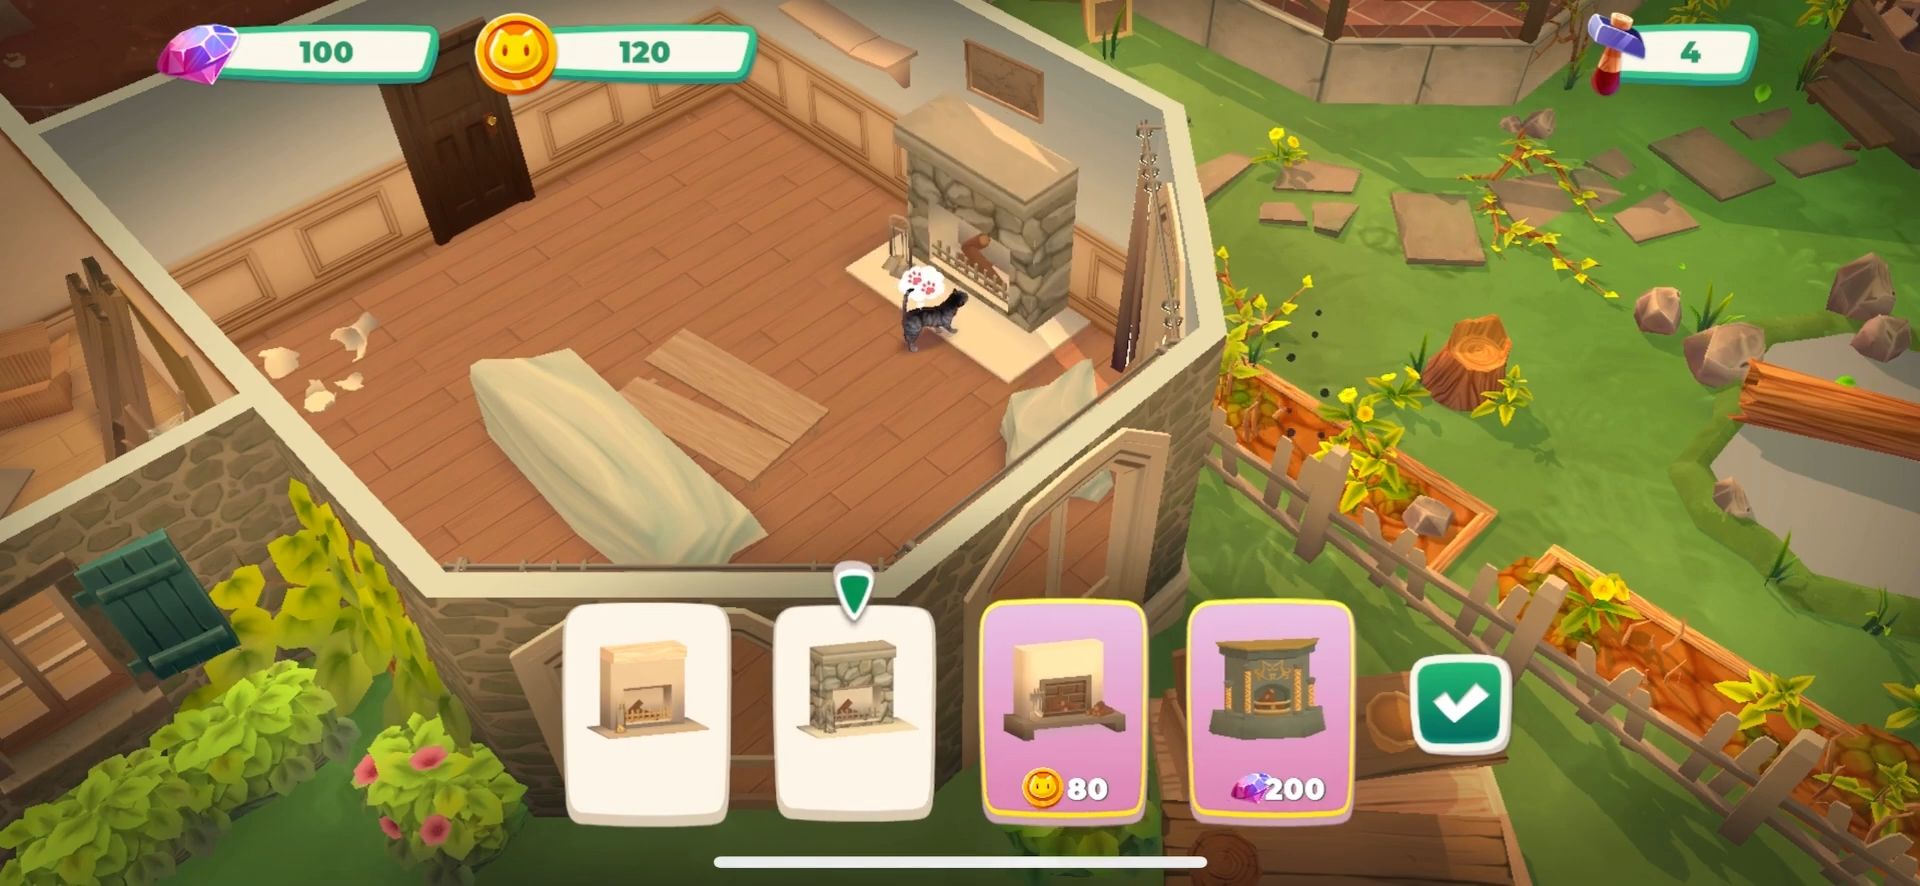 Cat Rescue Story: pets home - Android game screenshots.